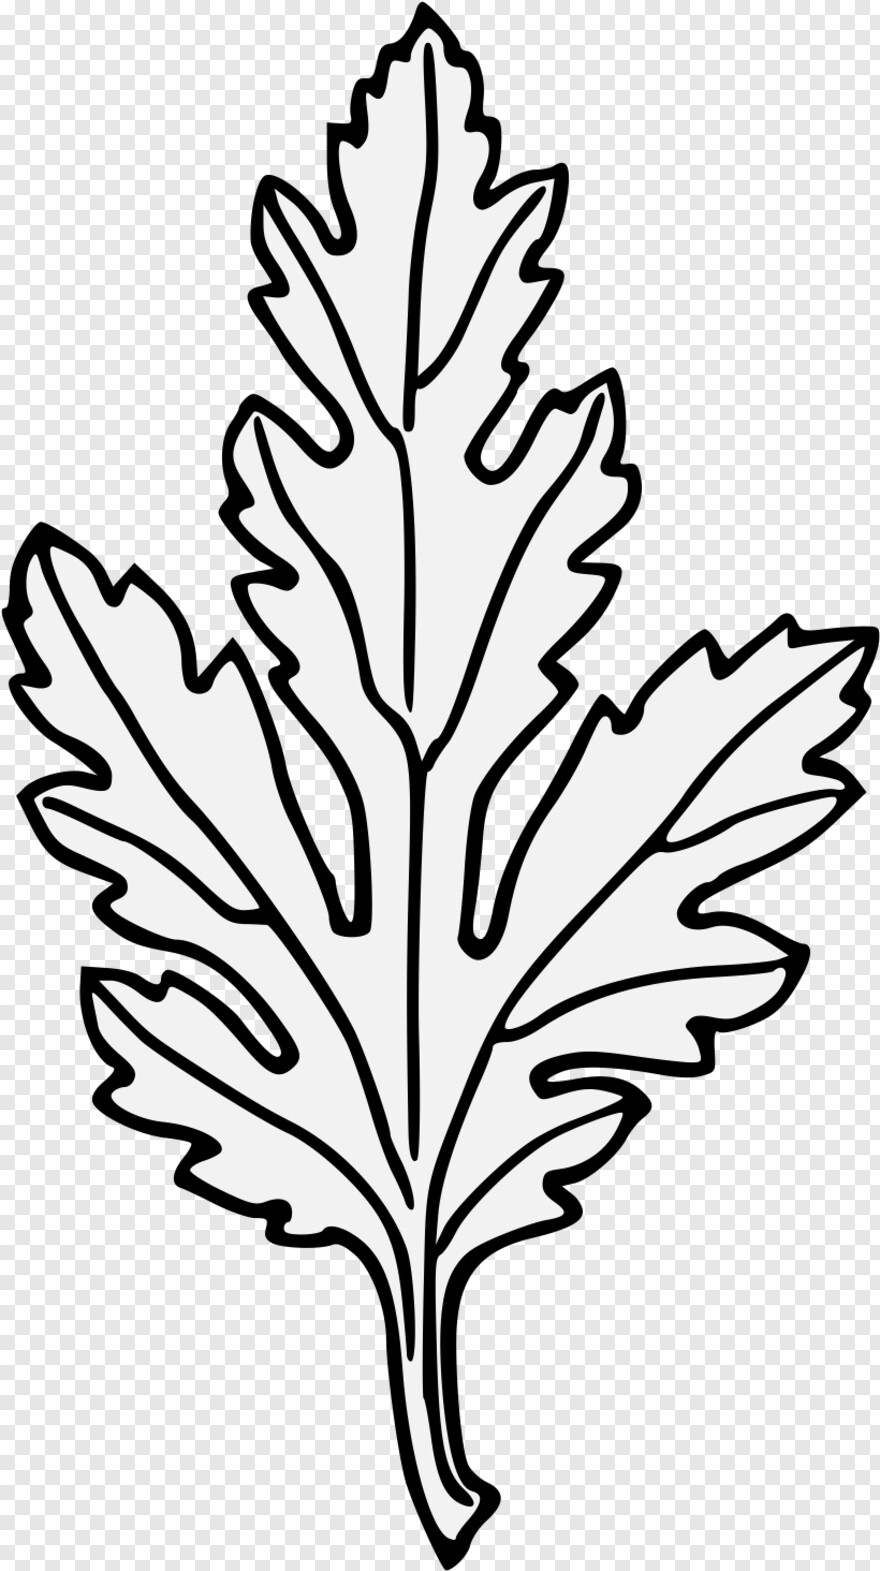 leaf-clipart # 1015702